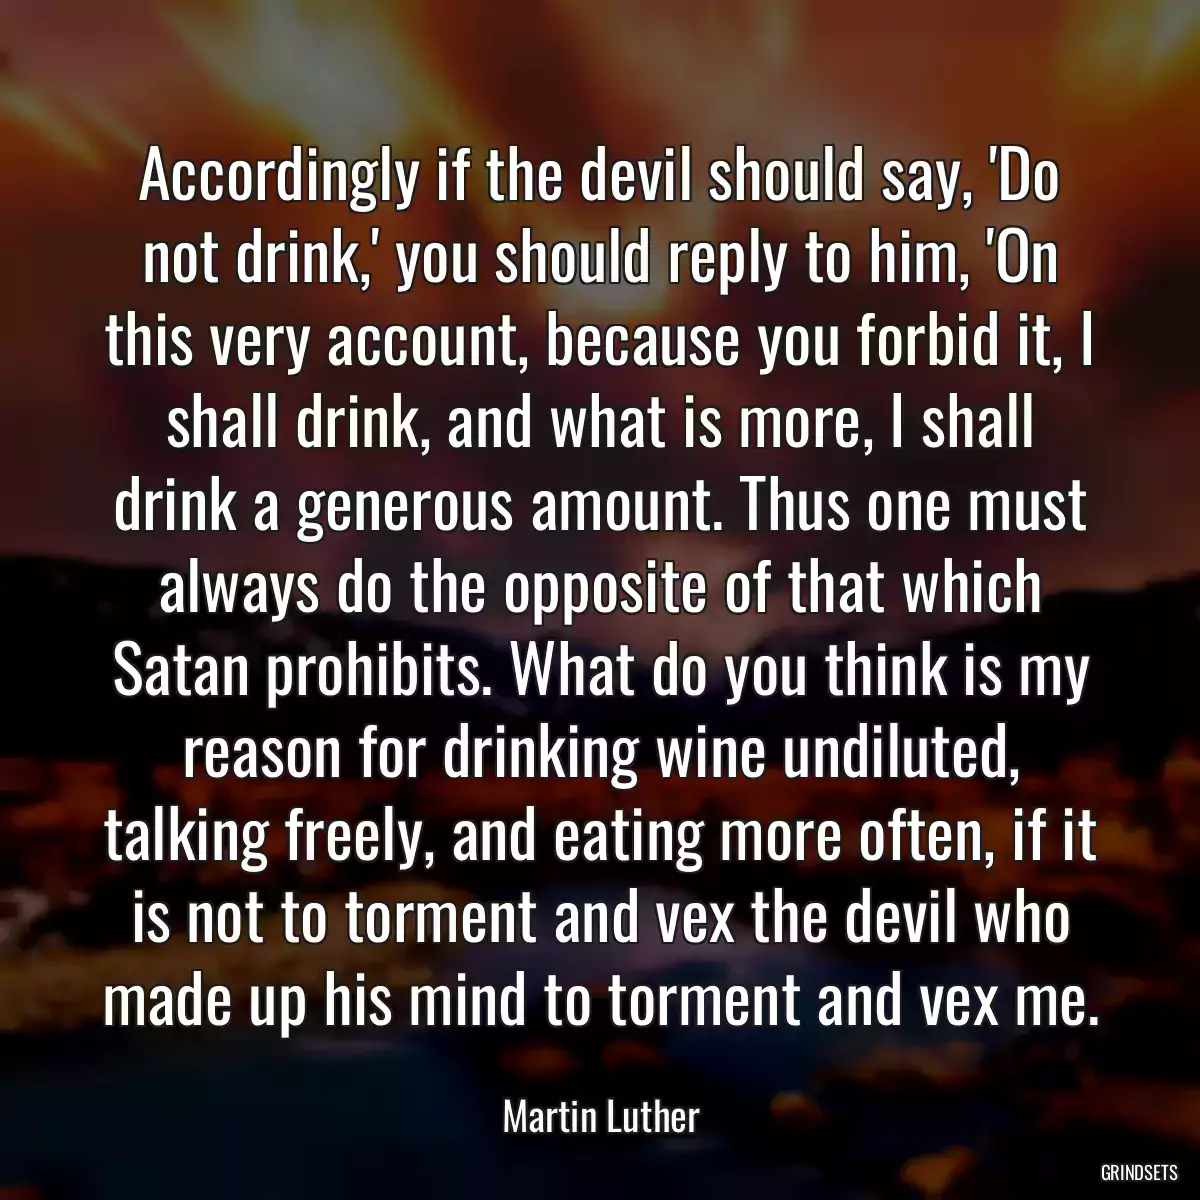 Accordingly if the devil should say, \'Do not drink,\' you should reply to him, \'On this very account, because you forbid it, I shall drink, and what is more, I shall drink a generous amount. Thus one must always do the opposite of that which Satan prohibits. What do you think is my reason for drinking wine undiluted, talking freely, and eating more often, if it is not to torment and vex the devil who made up his mind to torment and vex me.